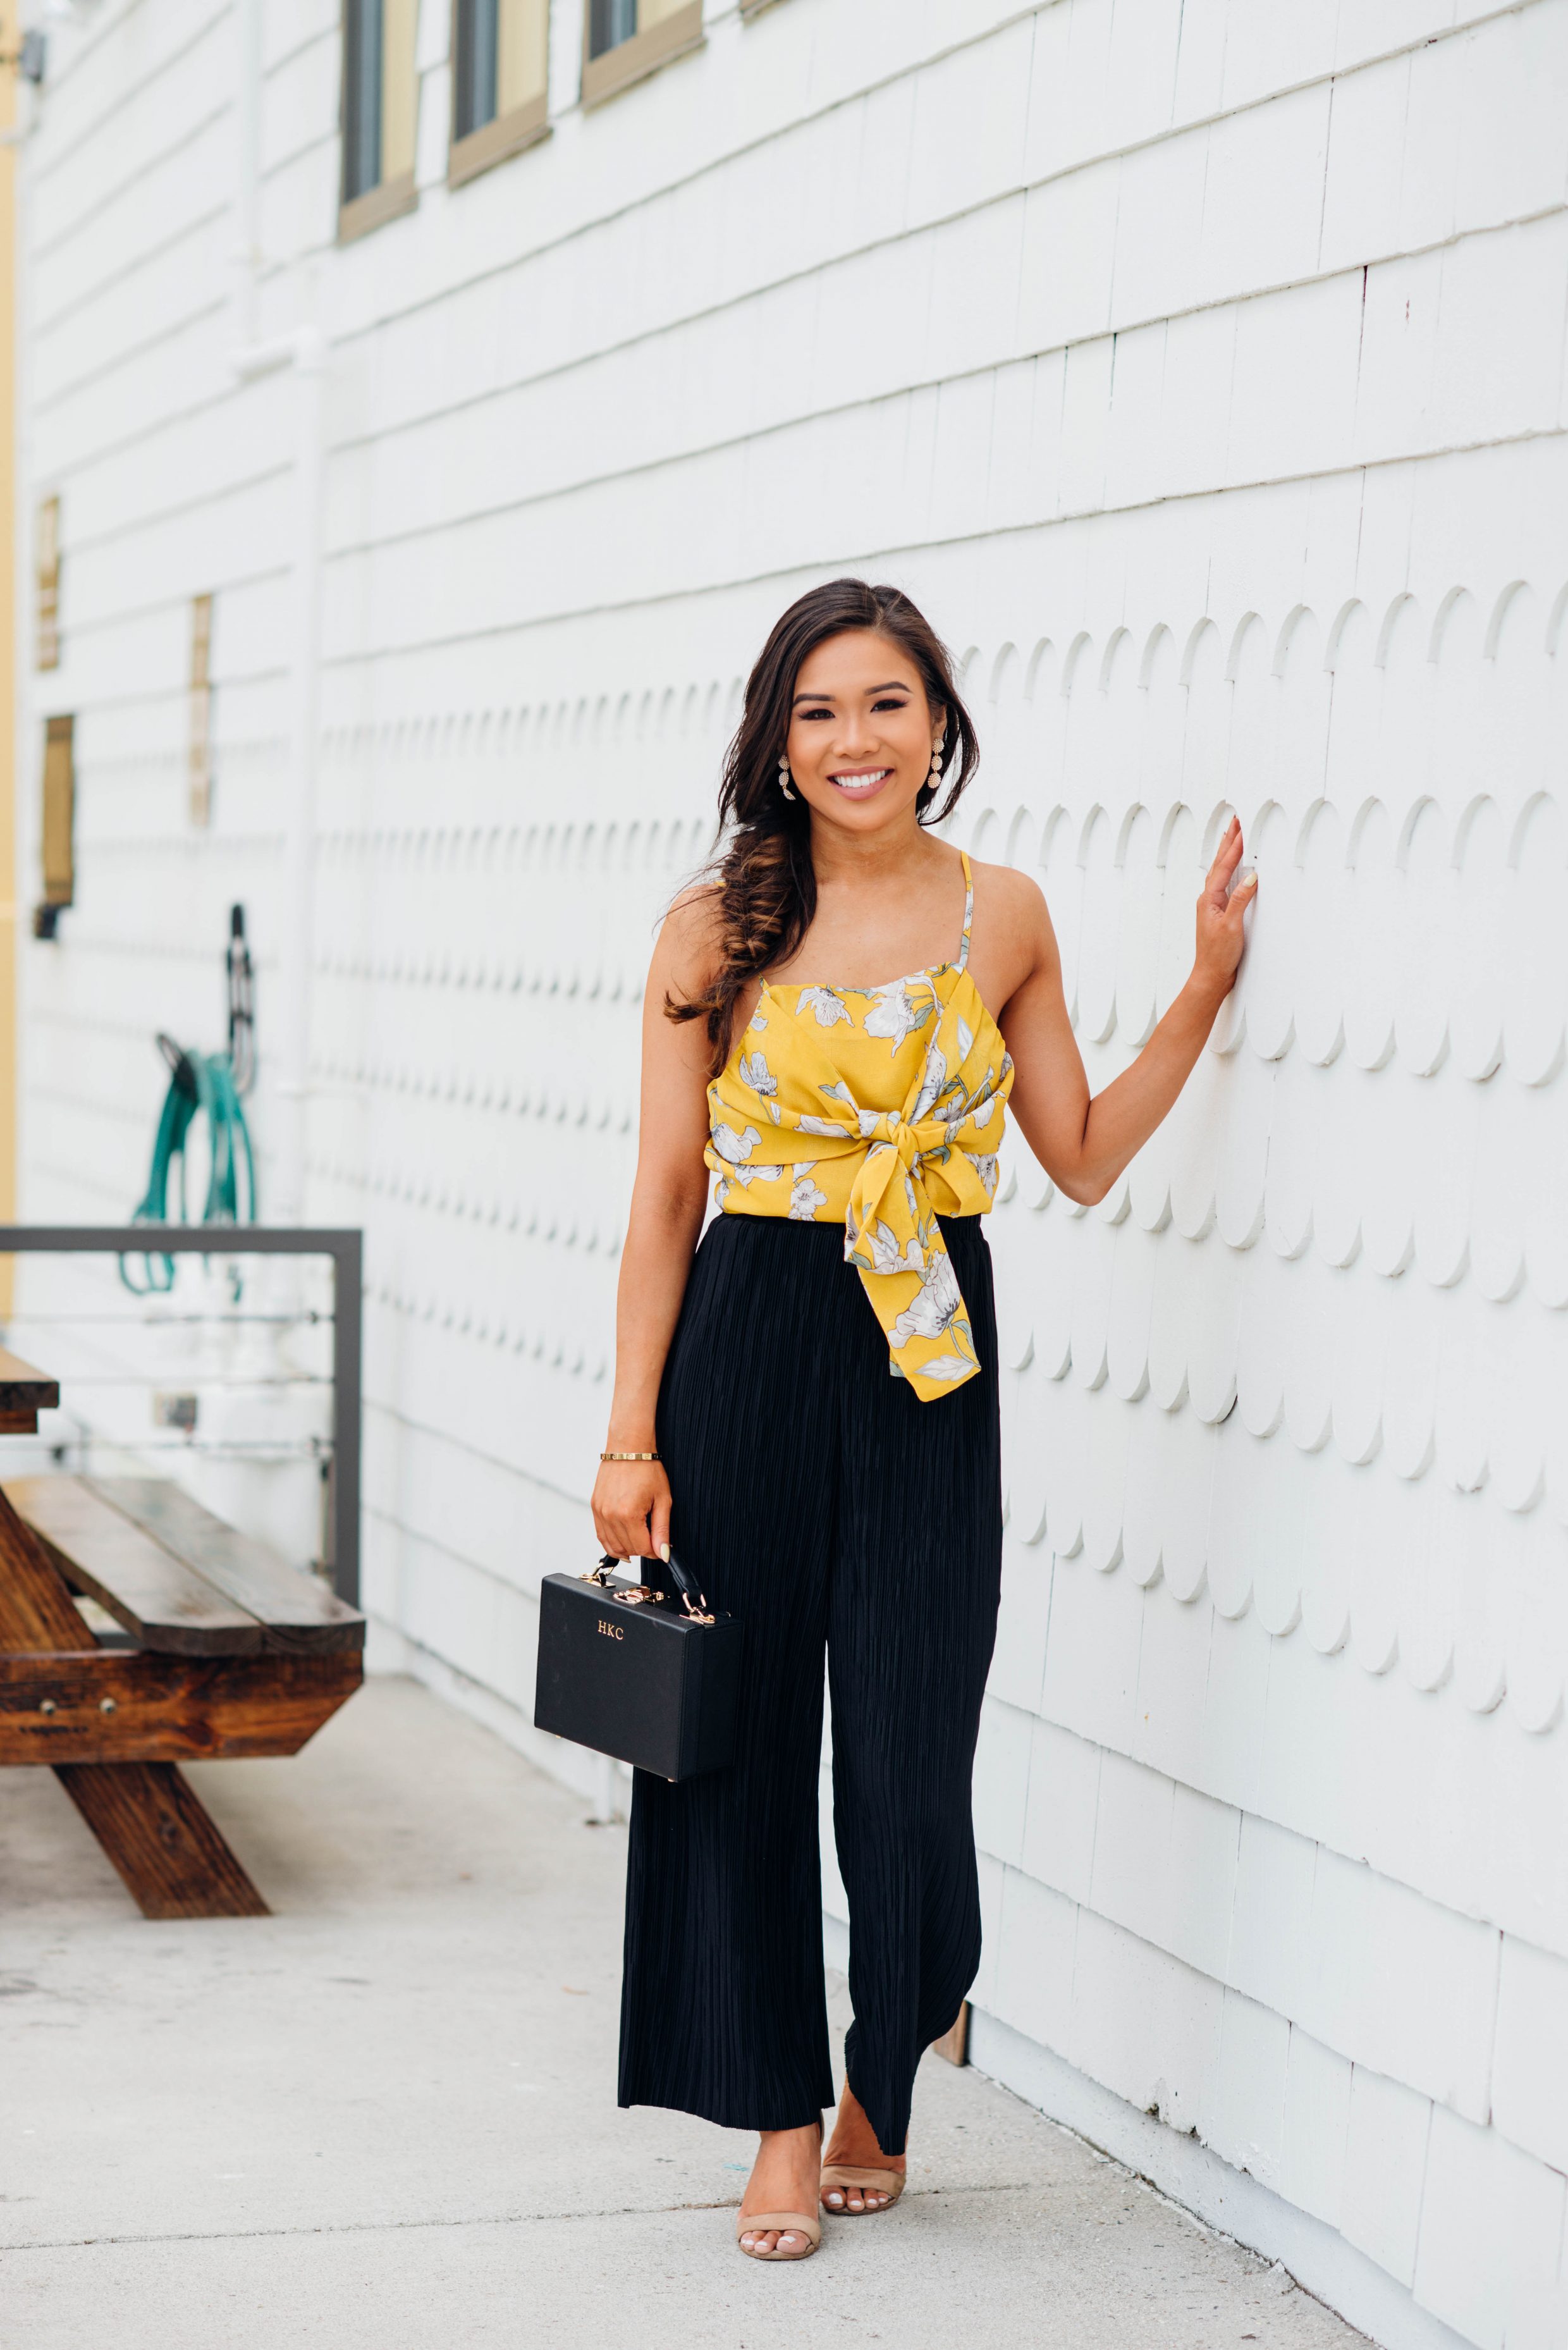 Hoang-Kim wears a JOA Tie-front crop top with Topshop wide leg pants and The Daily Edited Box Bag